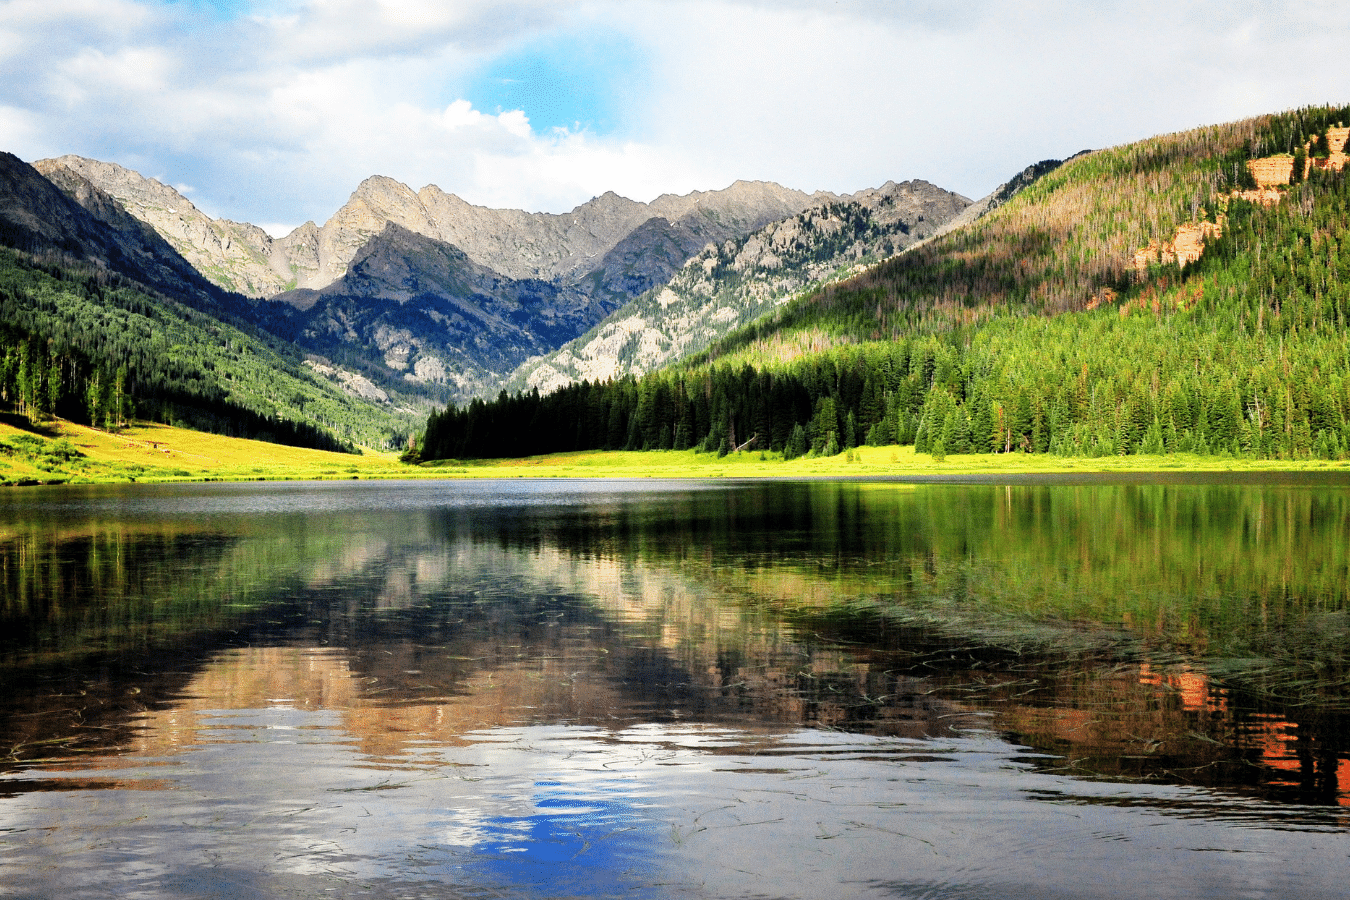 Mountains and lake in Vail Colorado